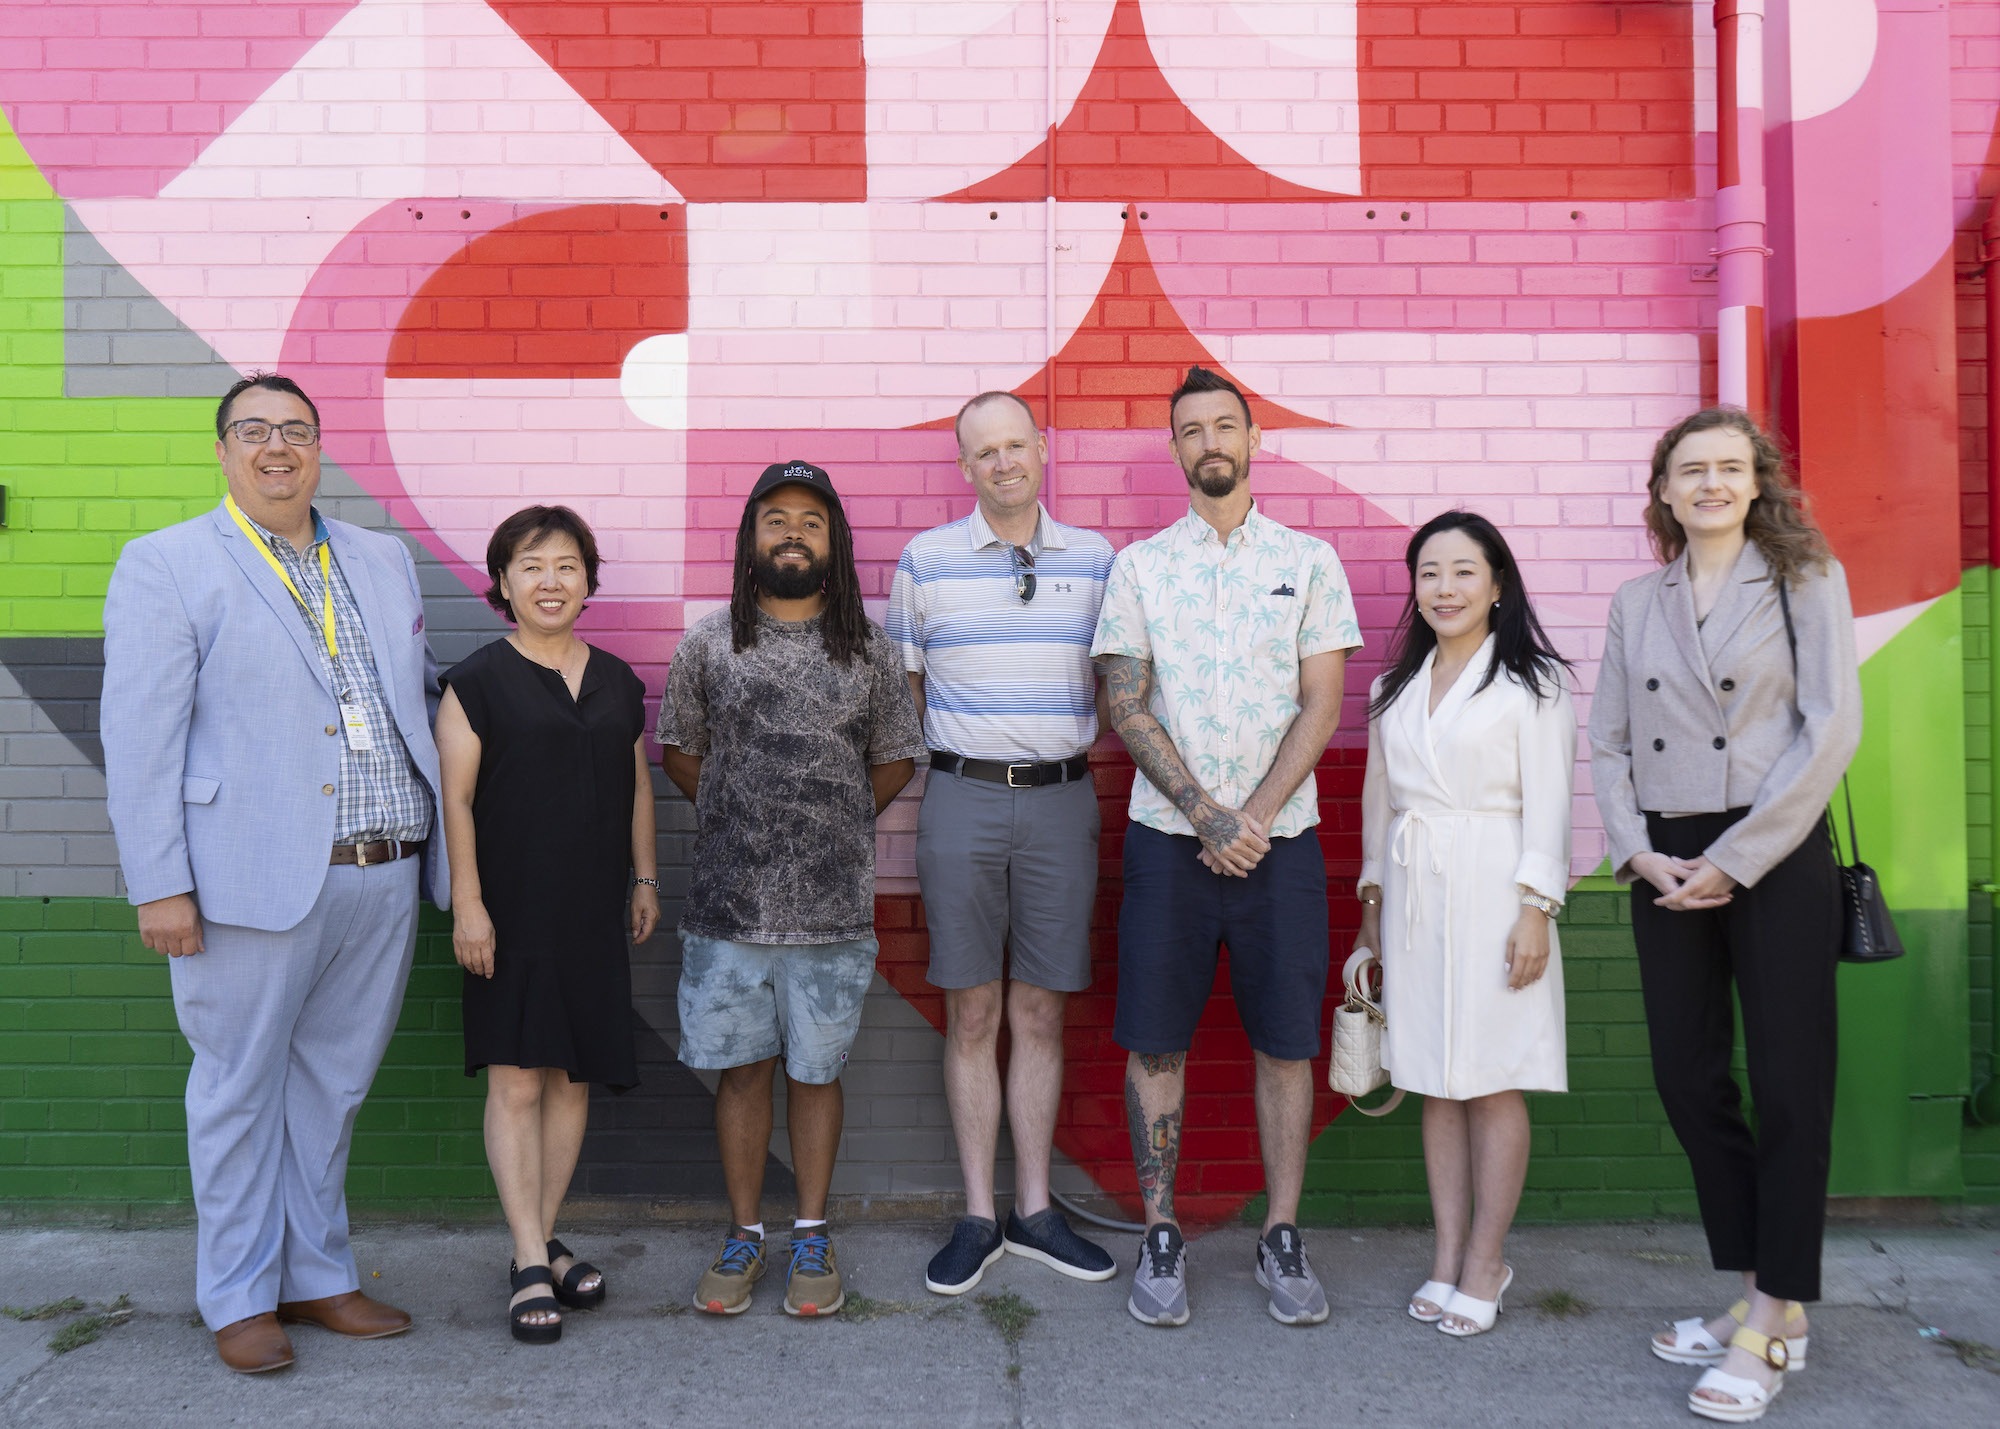 A group photo with artists Leyland Adams and Peru Dyer Jalea, and Willowdale BIA to celebrate a new mural production in Toronto's North York